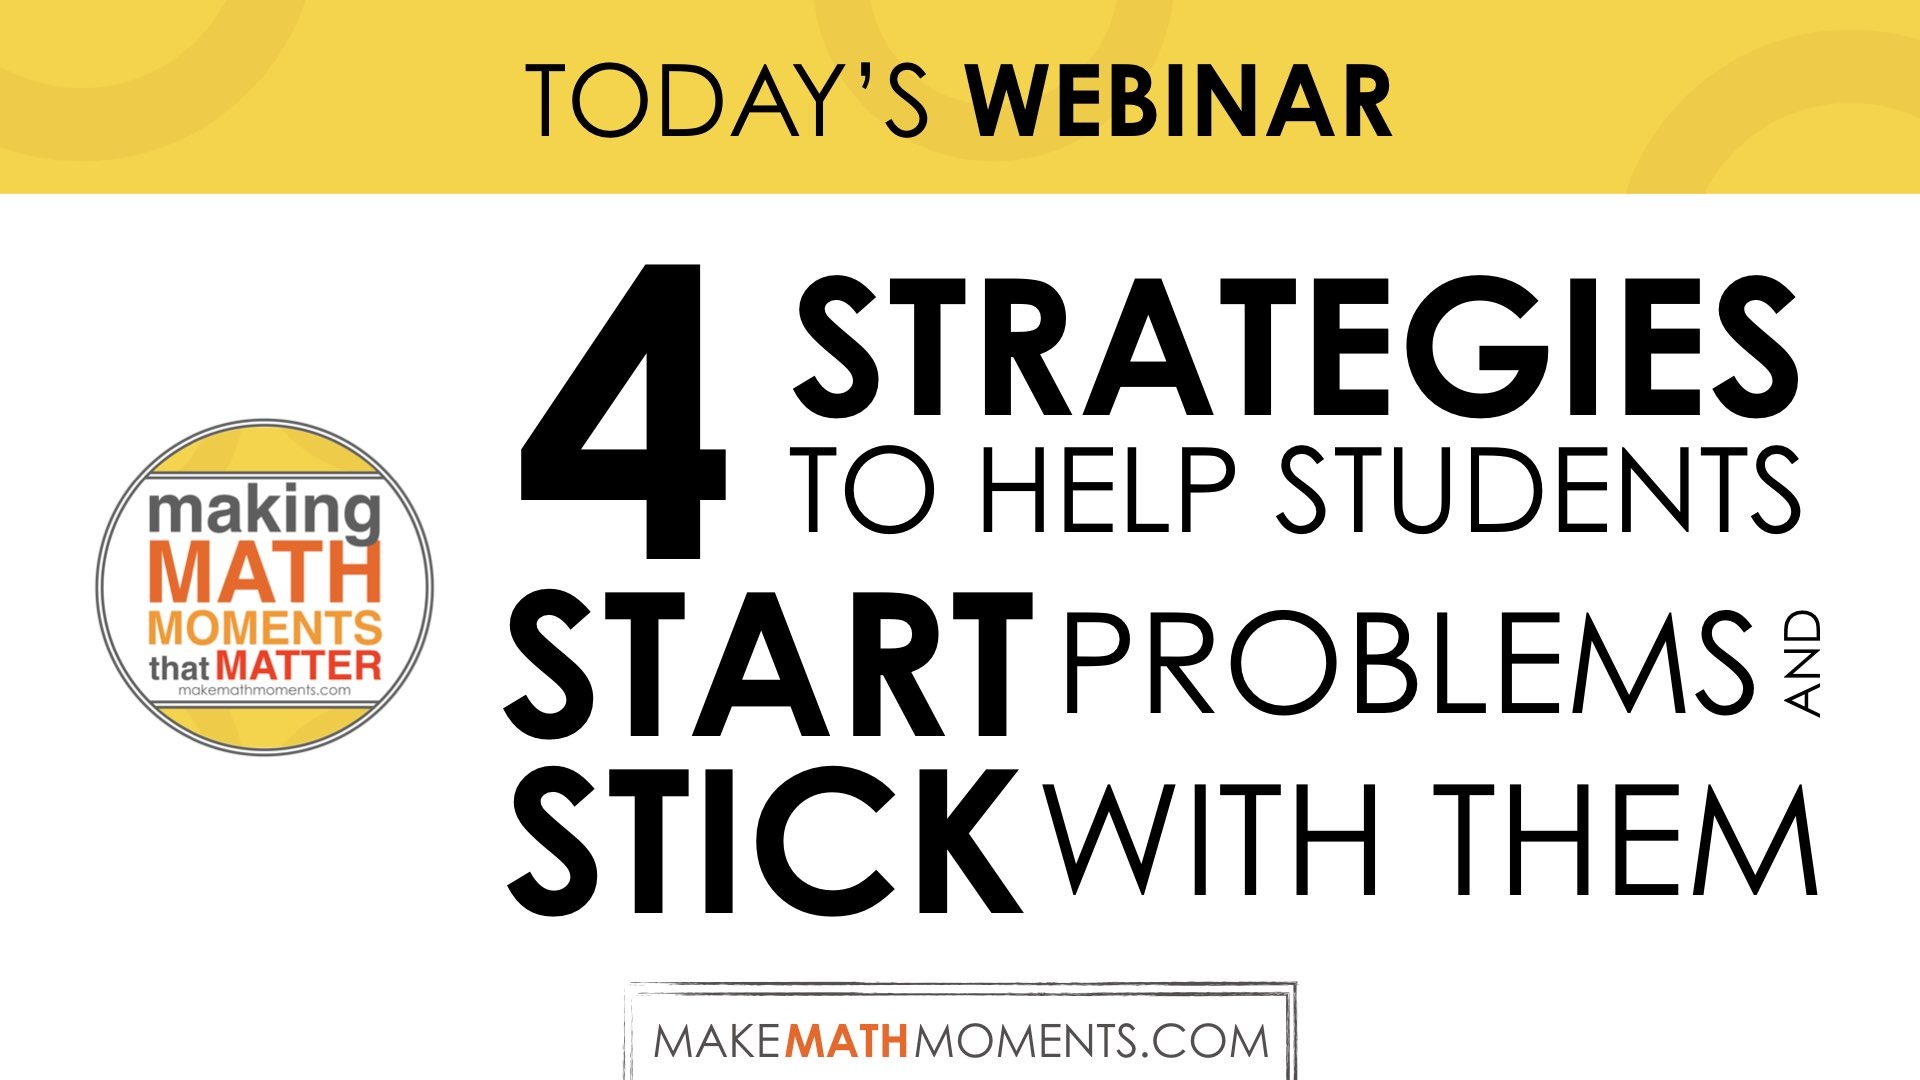 4 Strategies To Help Students Start Problems & Stick With Them